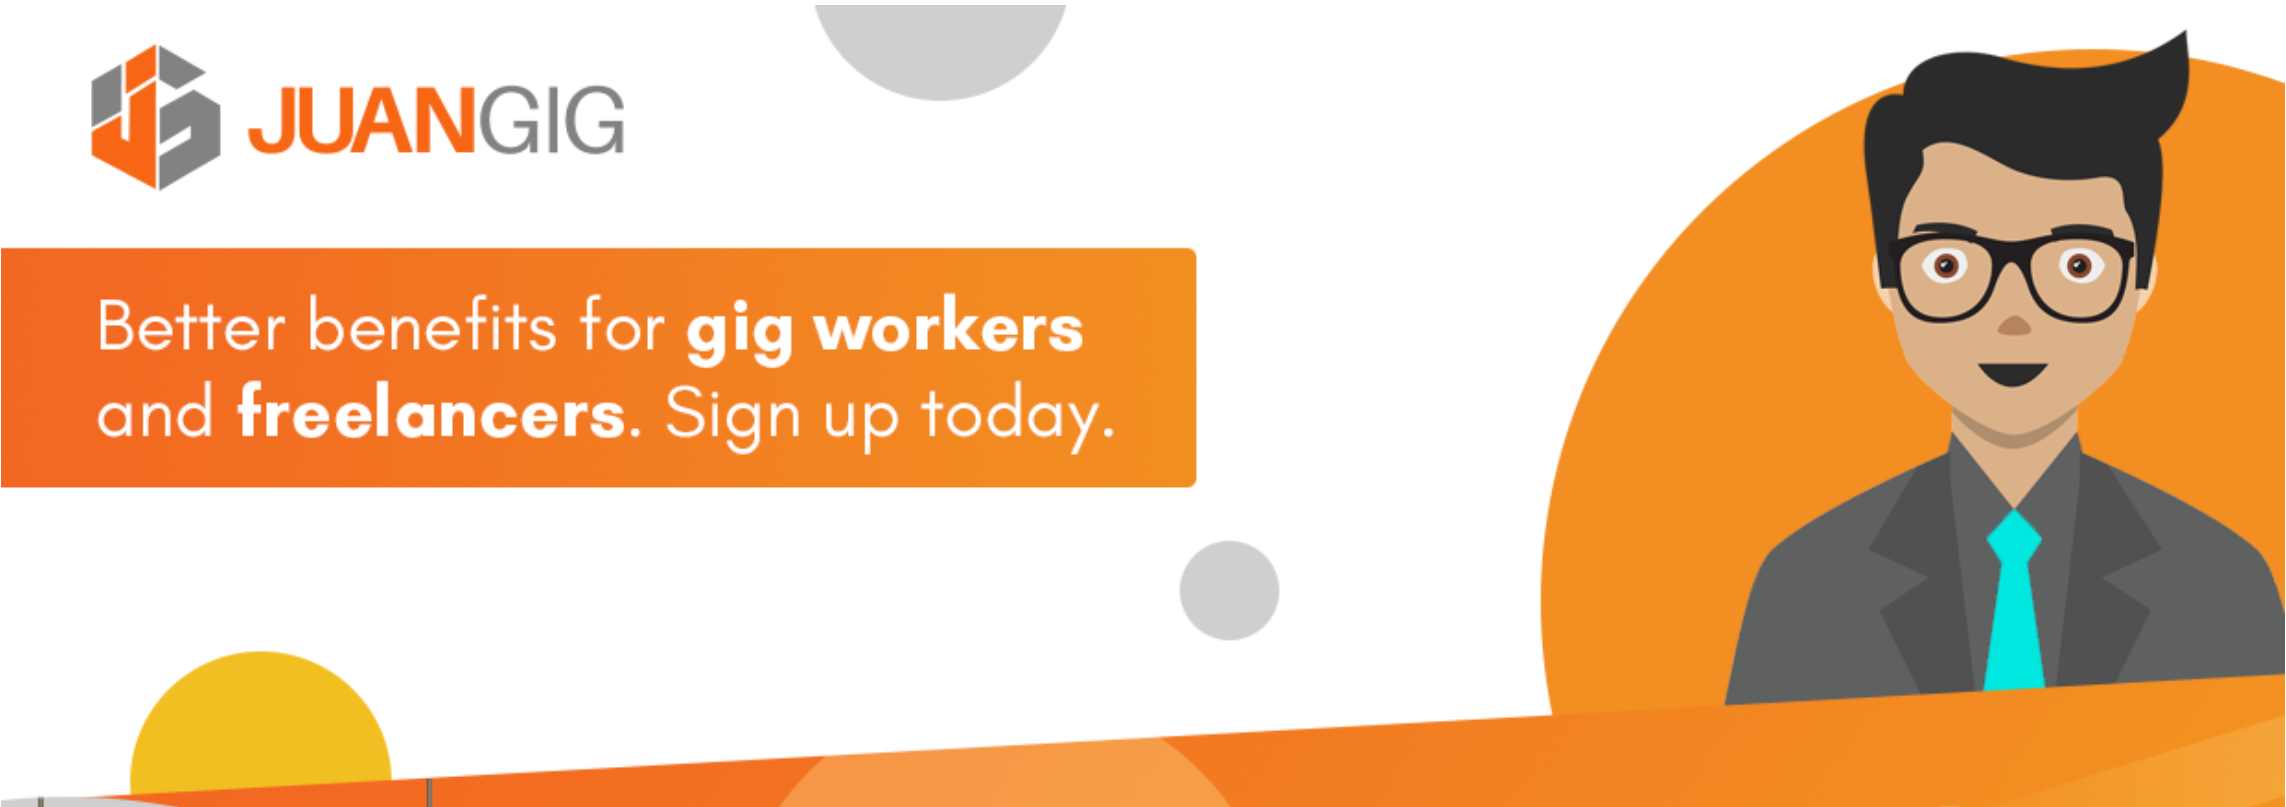 Better benefits for gig workers and freelancers. Sign up today.